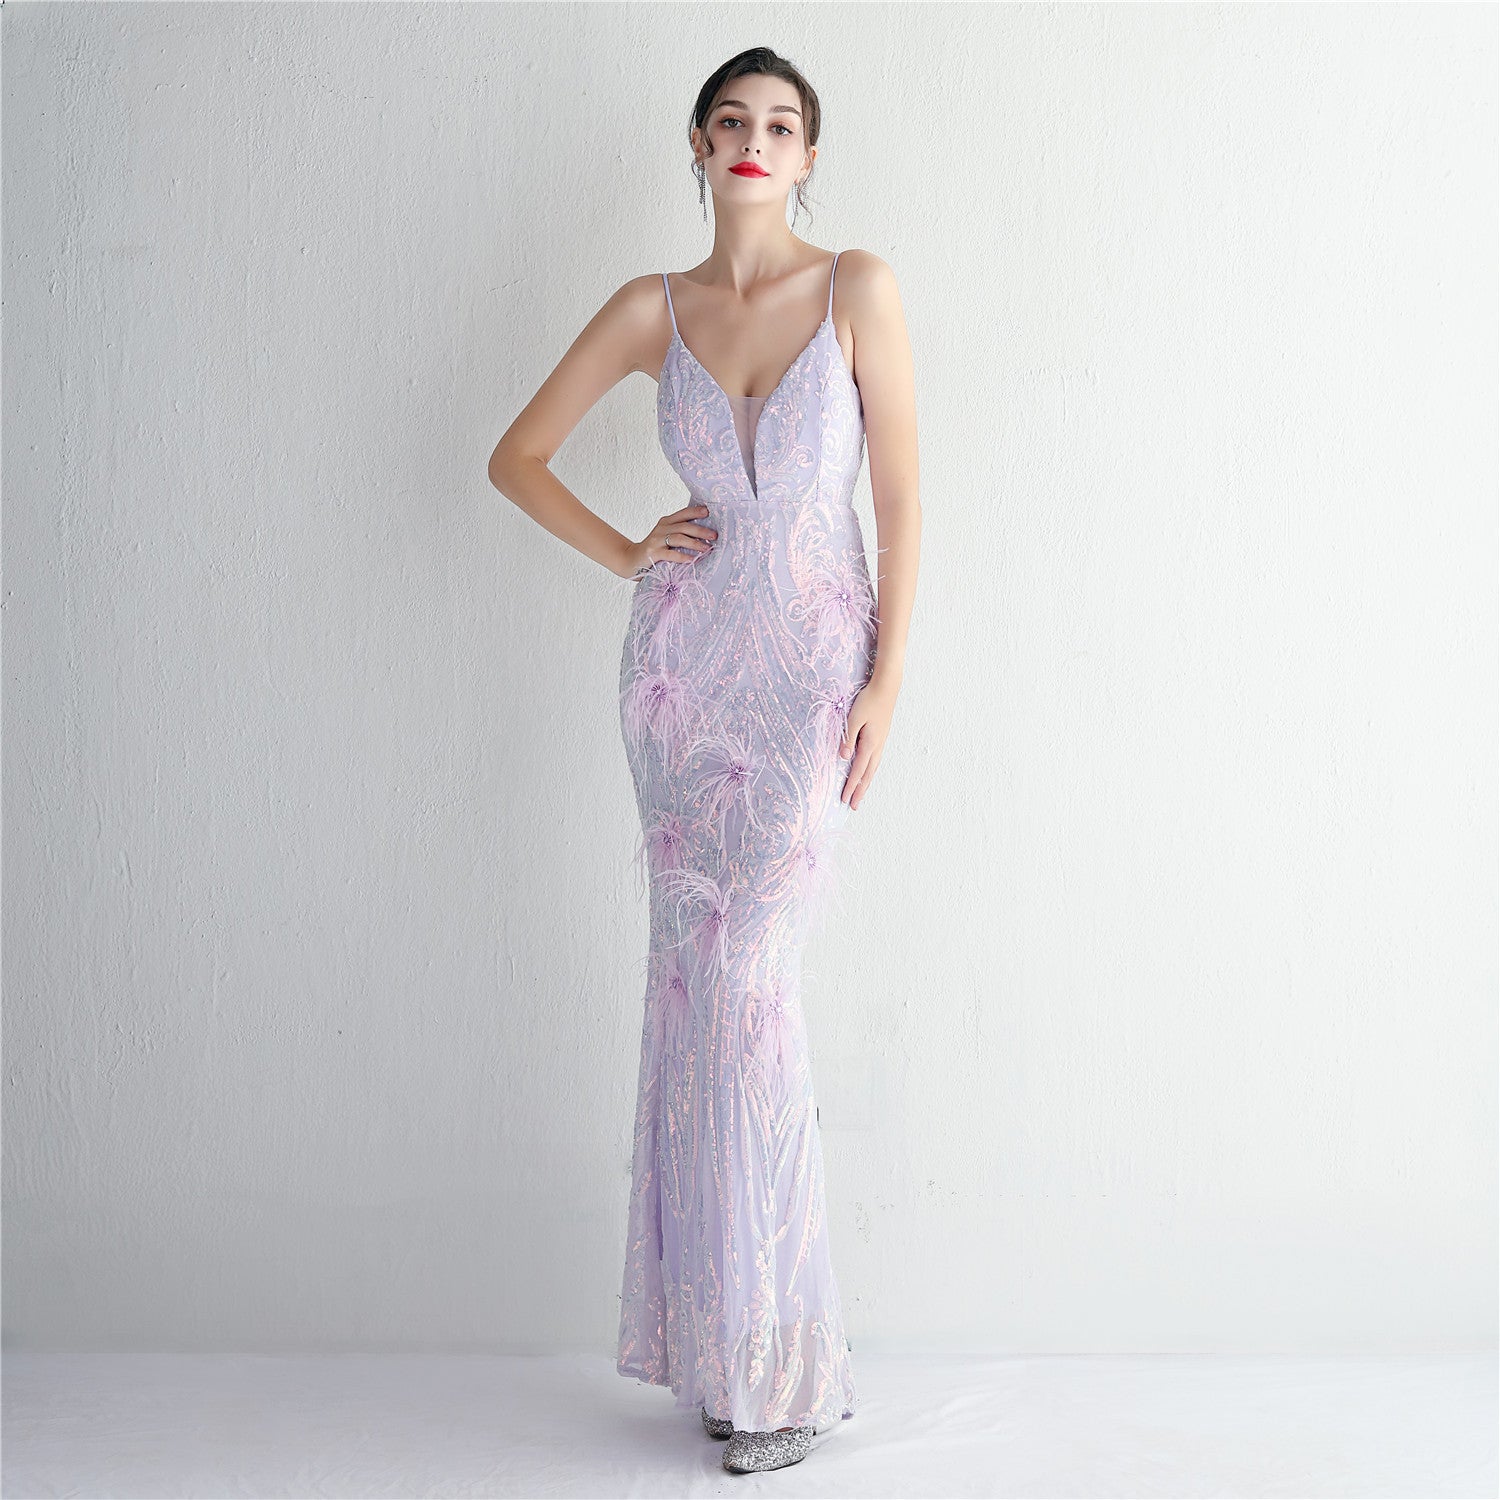 Luxury Ostrich Feather Feather Party Dress With Long Sleeves, V Neck,  Sequins Appliques, And Side Slit Customizable For Formal Prom And Evening  Events From Warlikeman, $237.29